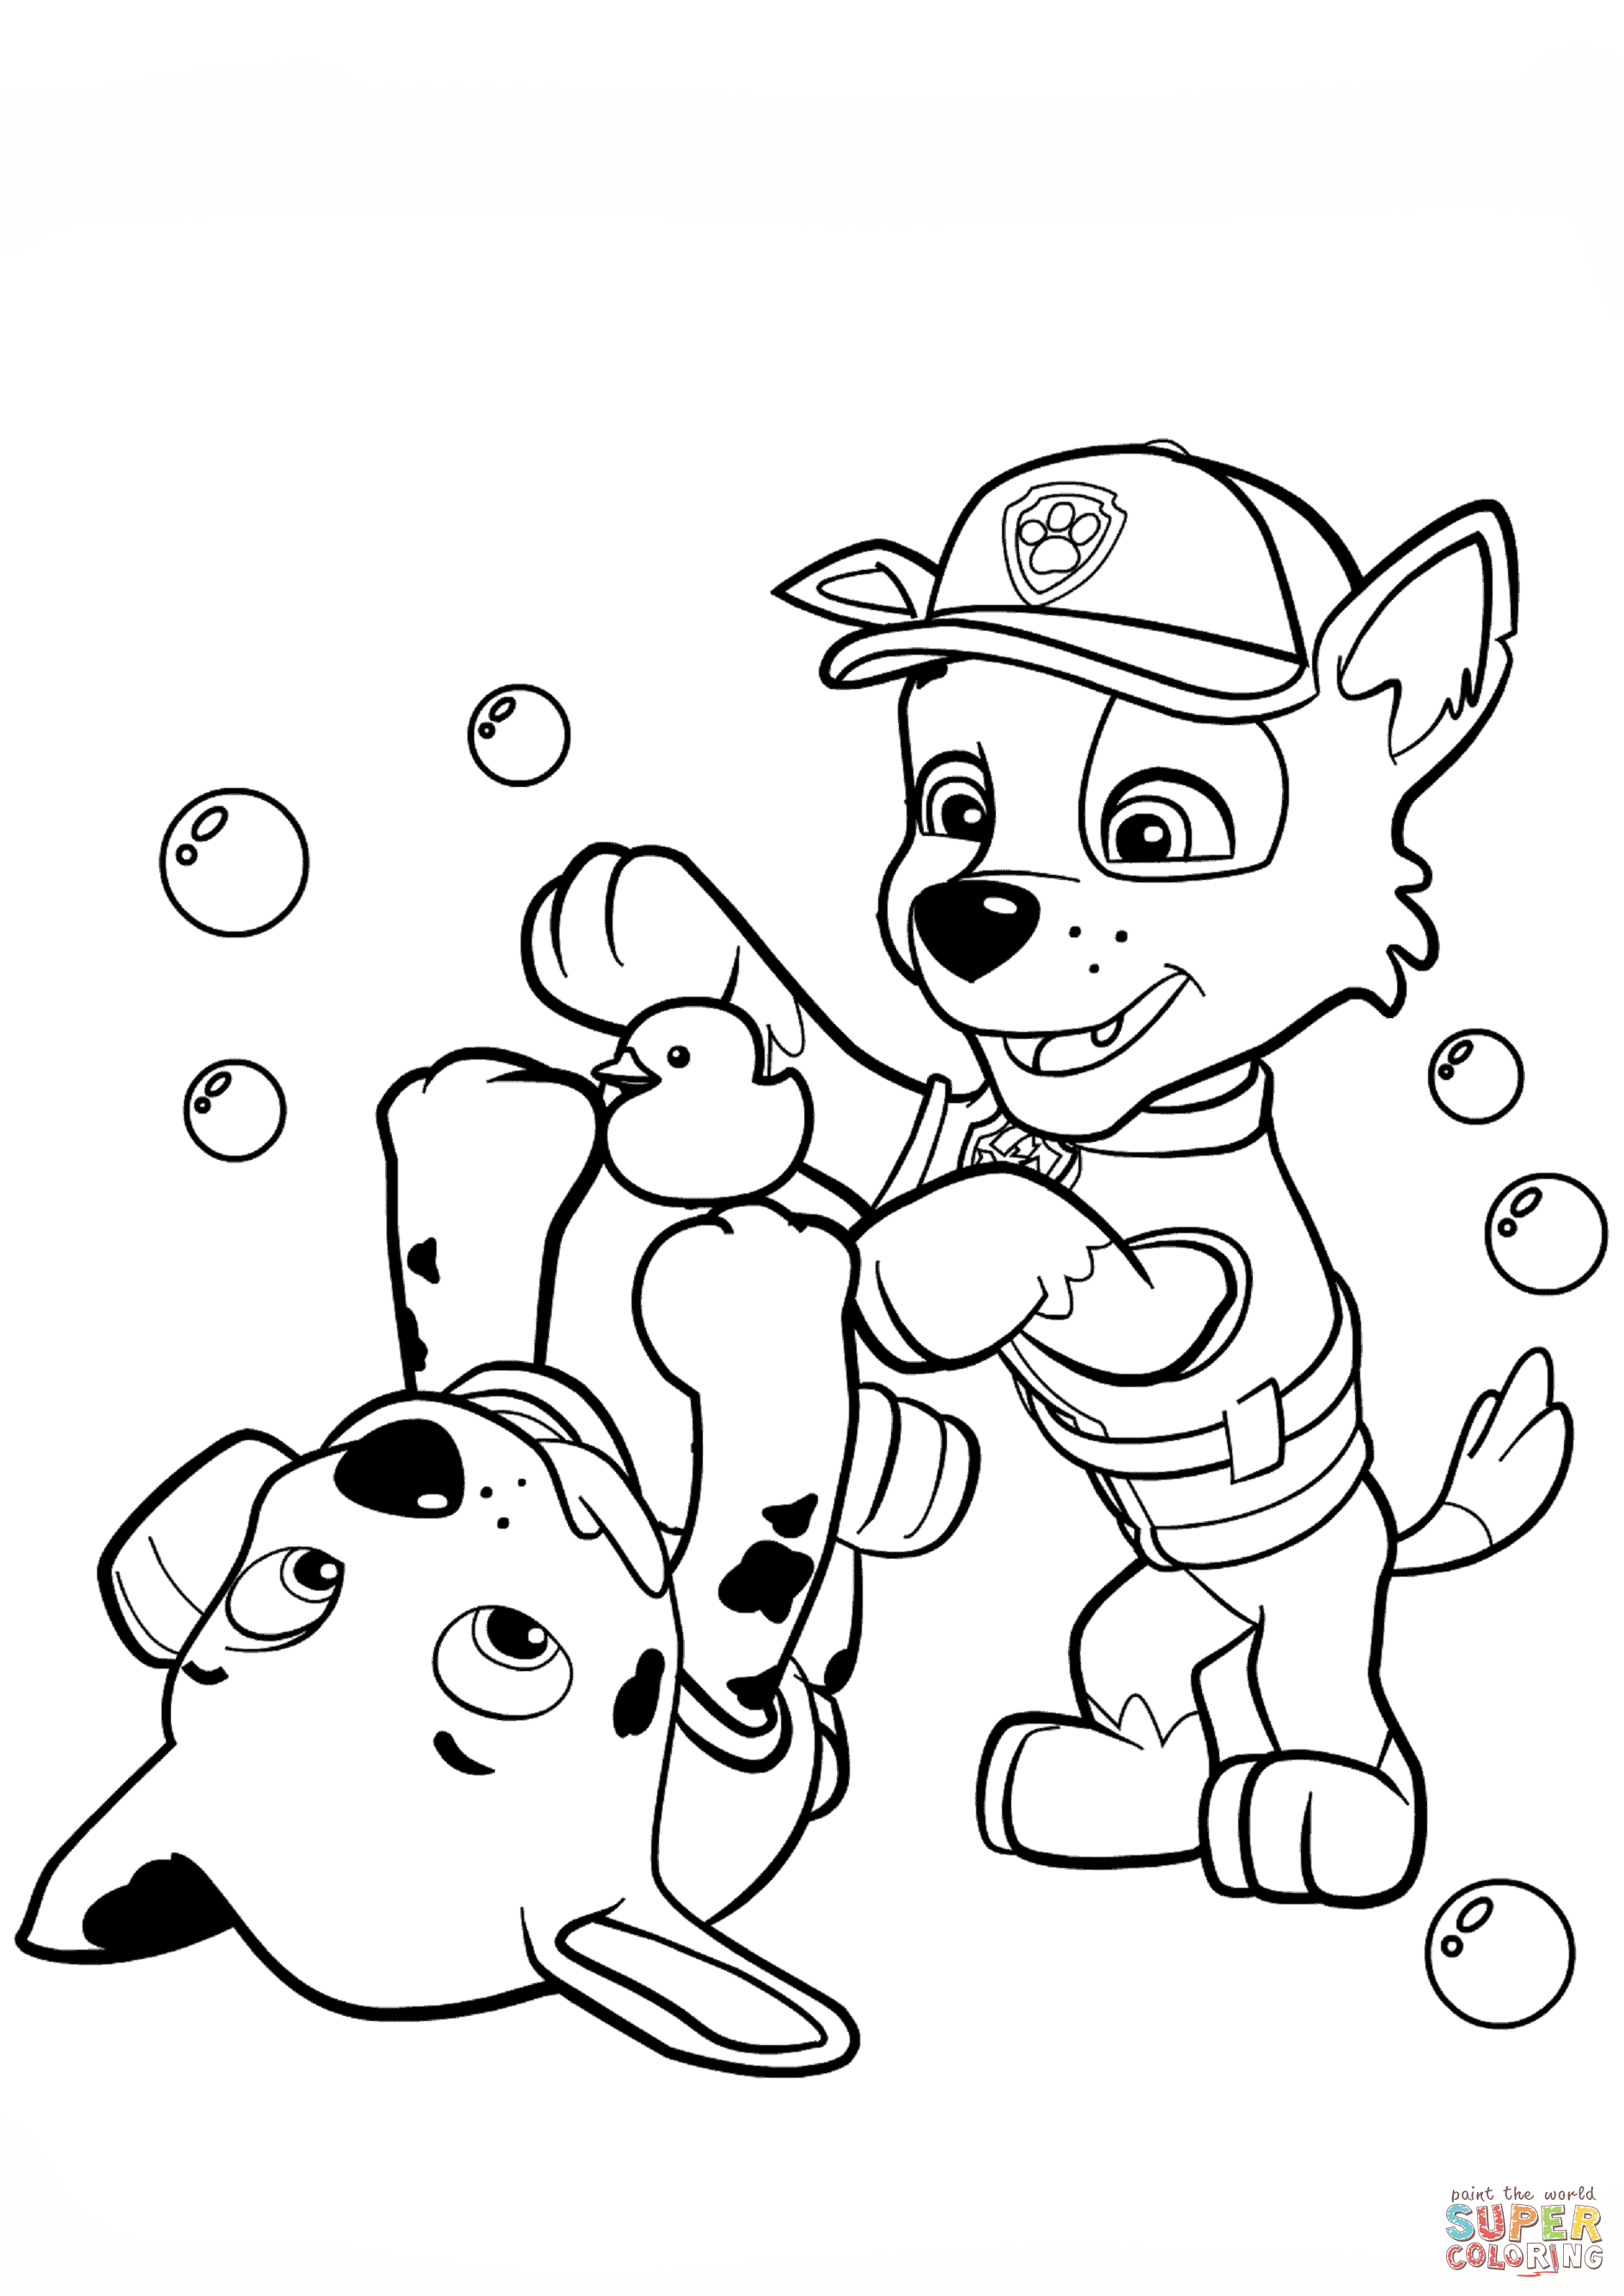 Paw Patrol Rocky And Marshall Coloring Page | Free Printable - Free Printable Paw Patrol Coloring Pages